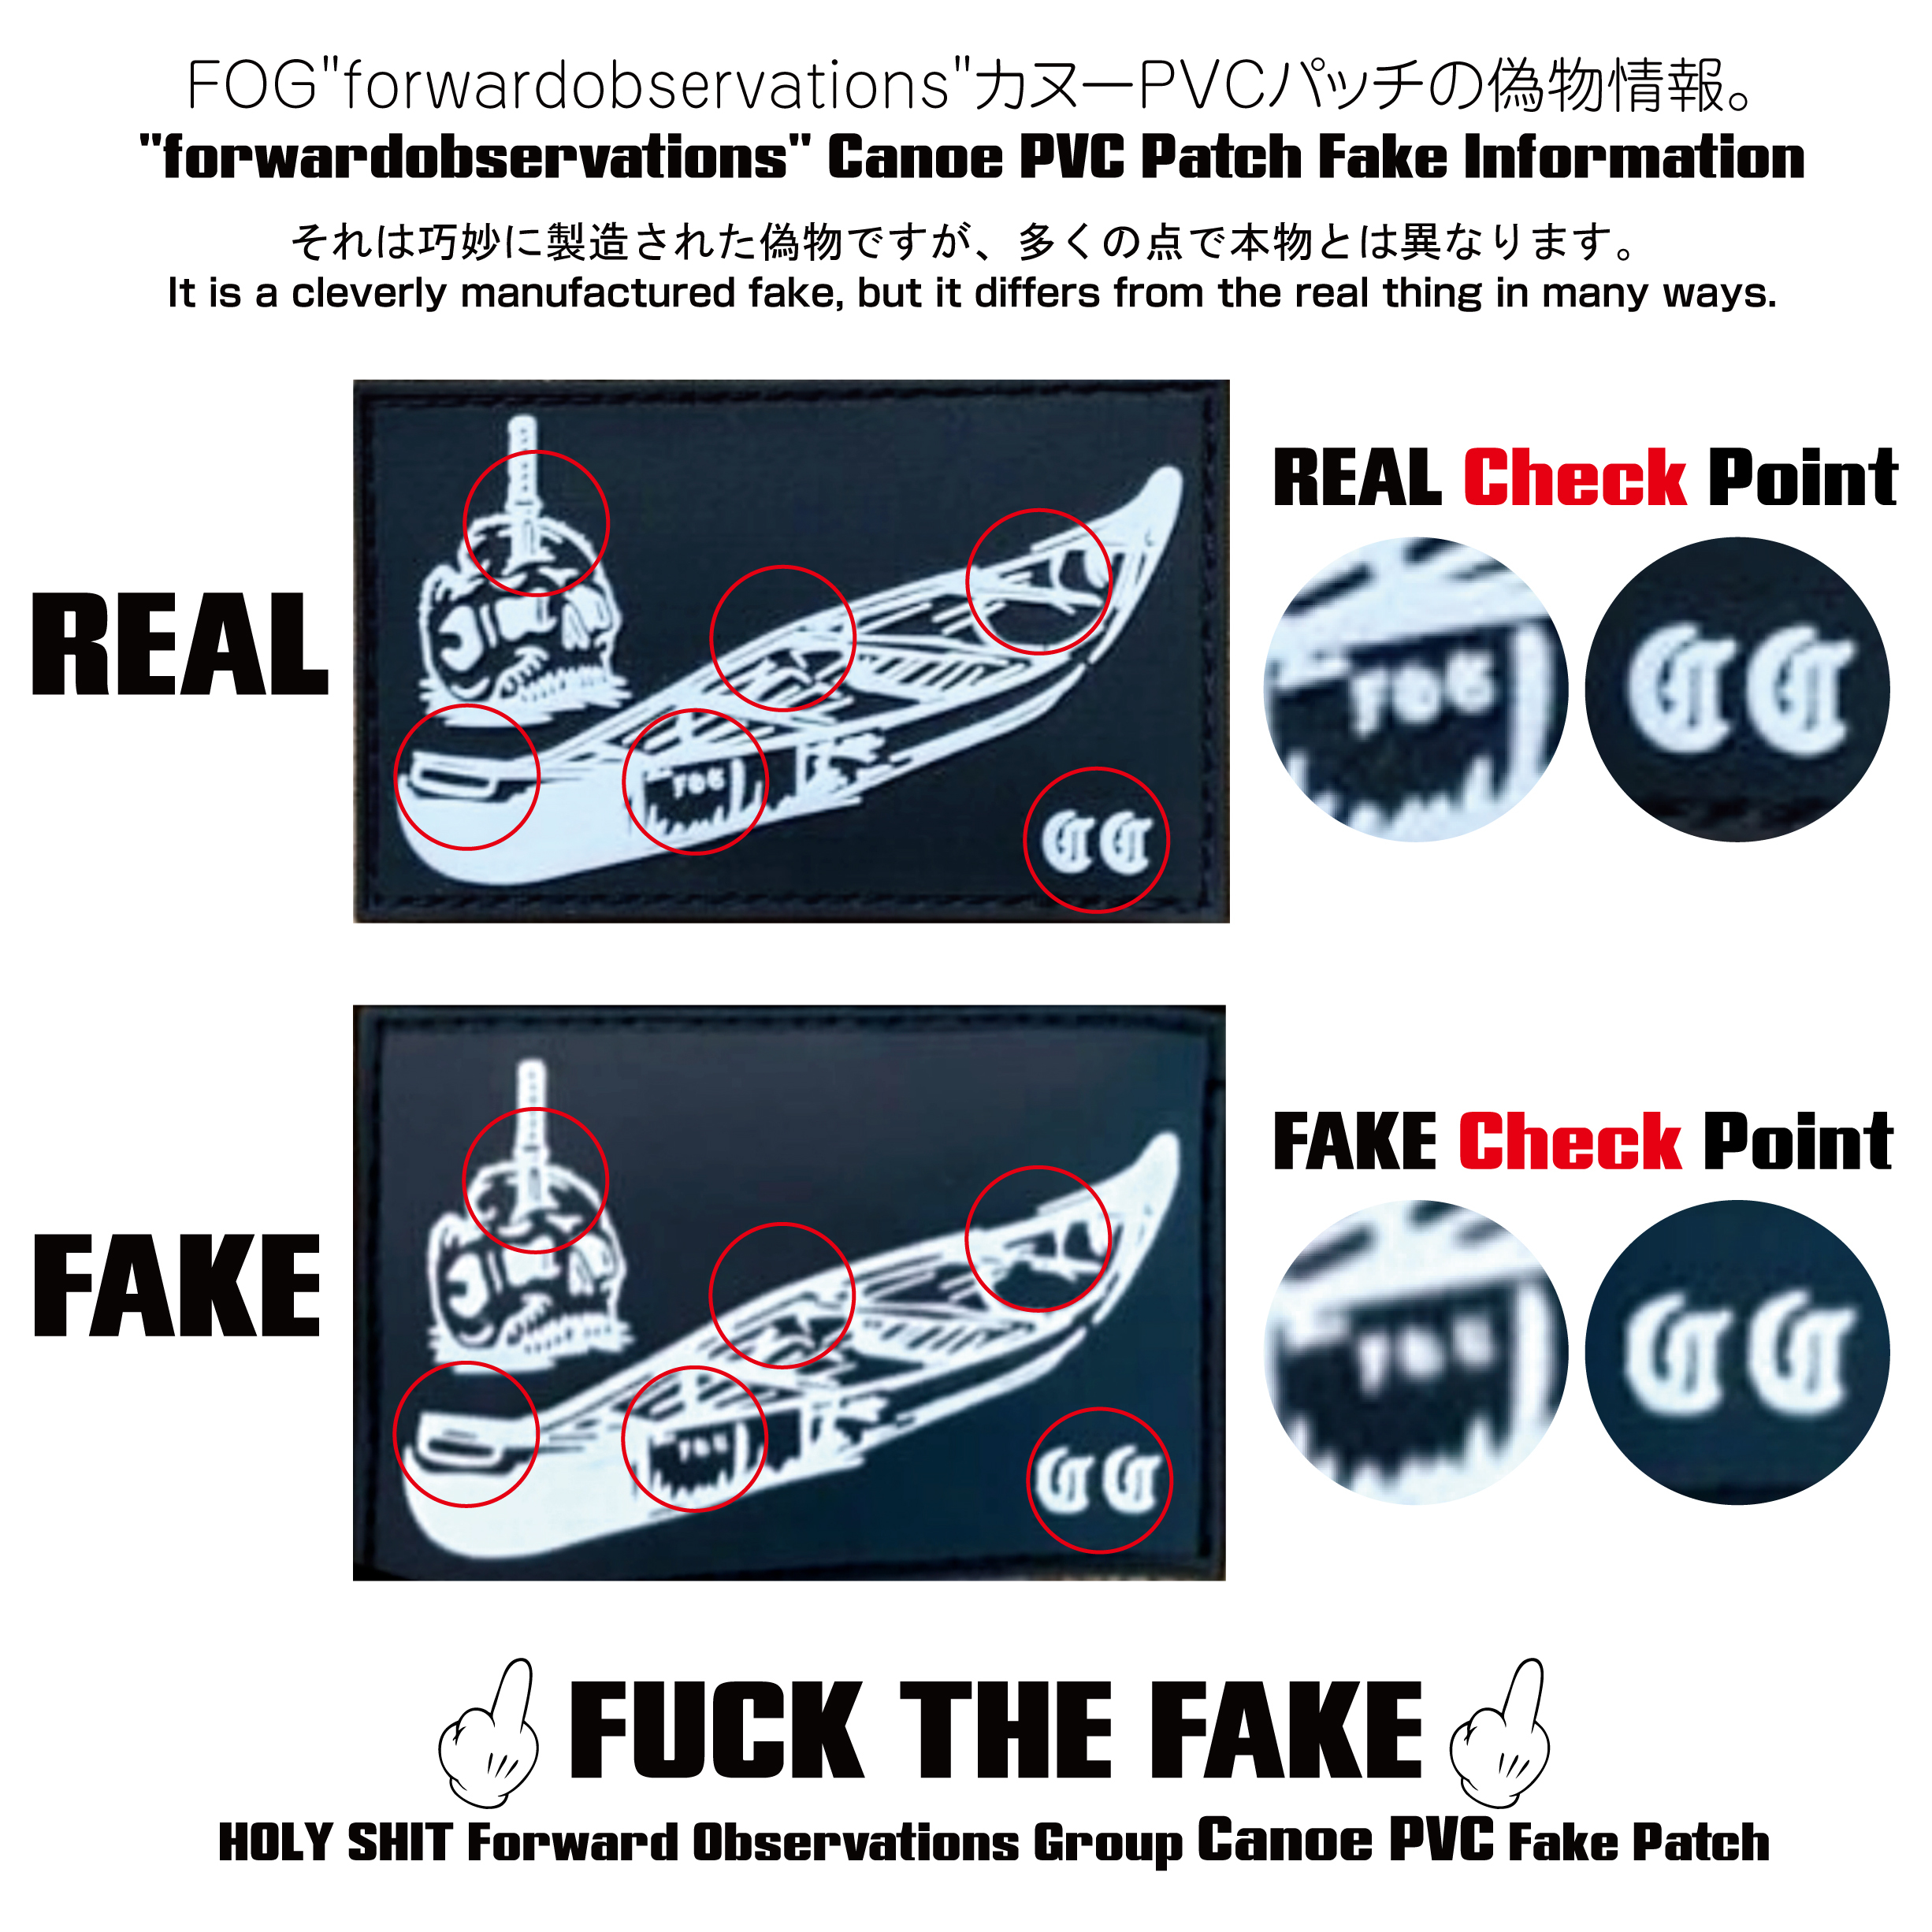 Forward Observations Group Canoe PVC Patch REAL or FAKE FUCK THE FAKE